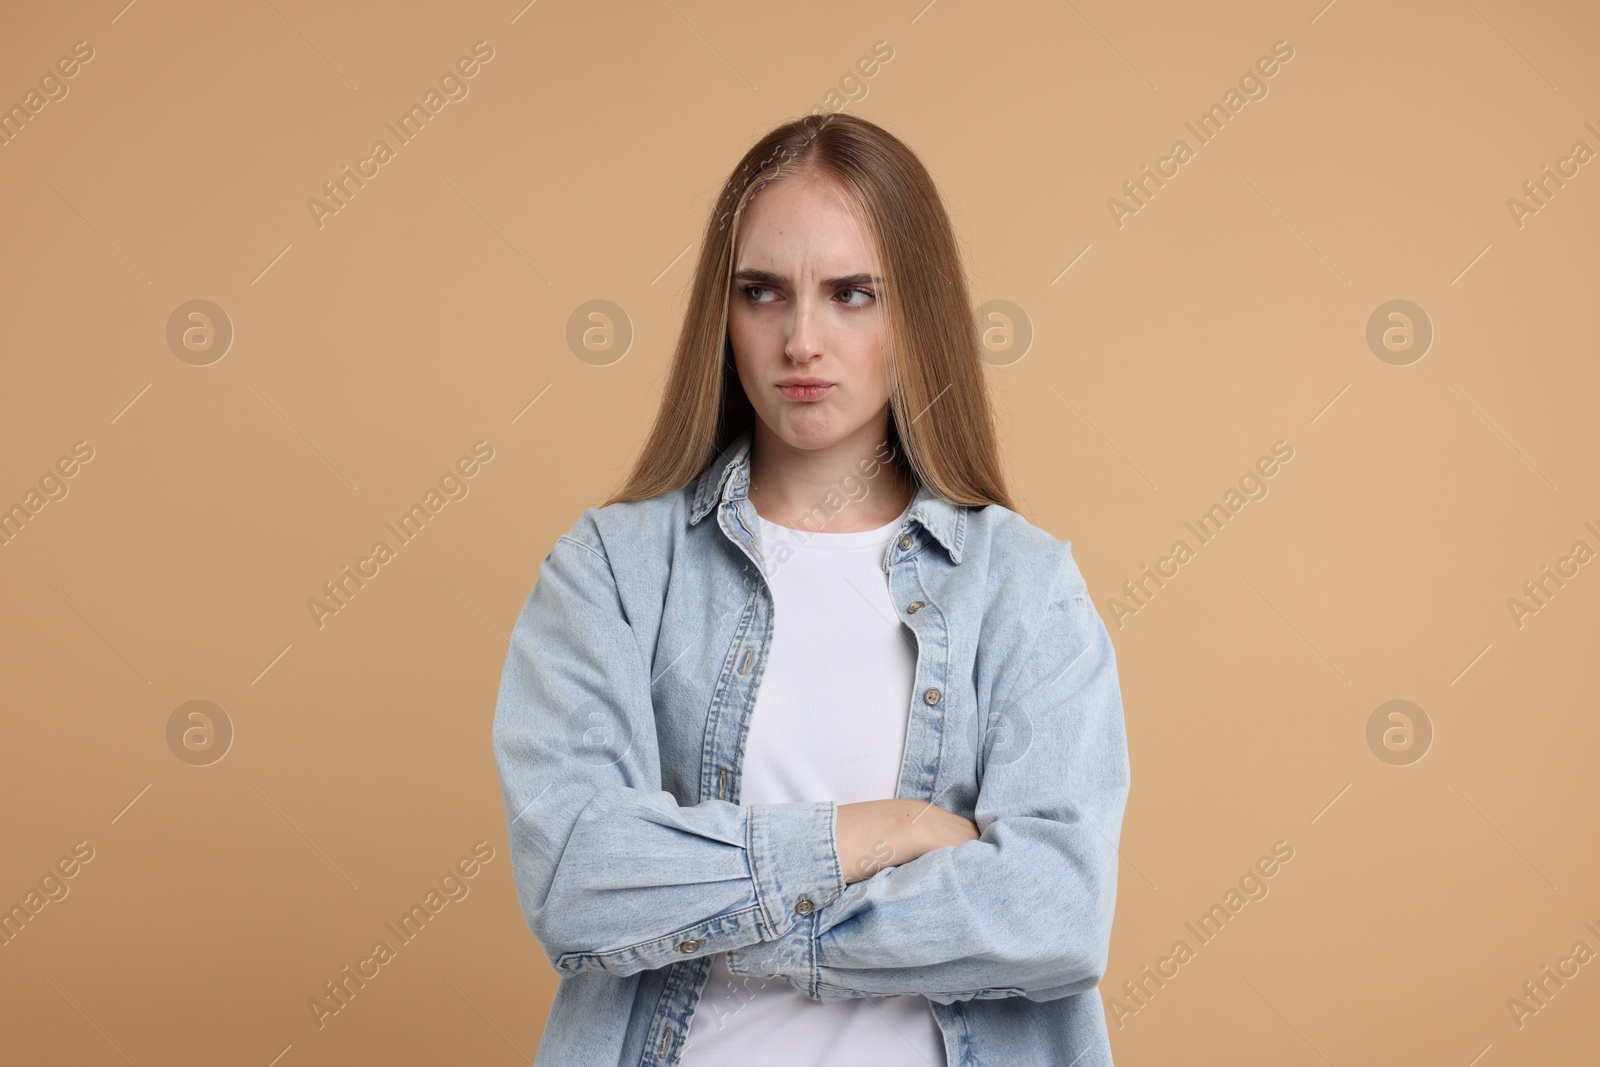 Photo of Resentful woman with crossed arms on beige background